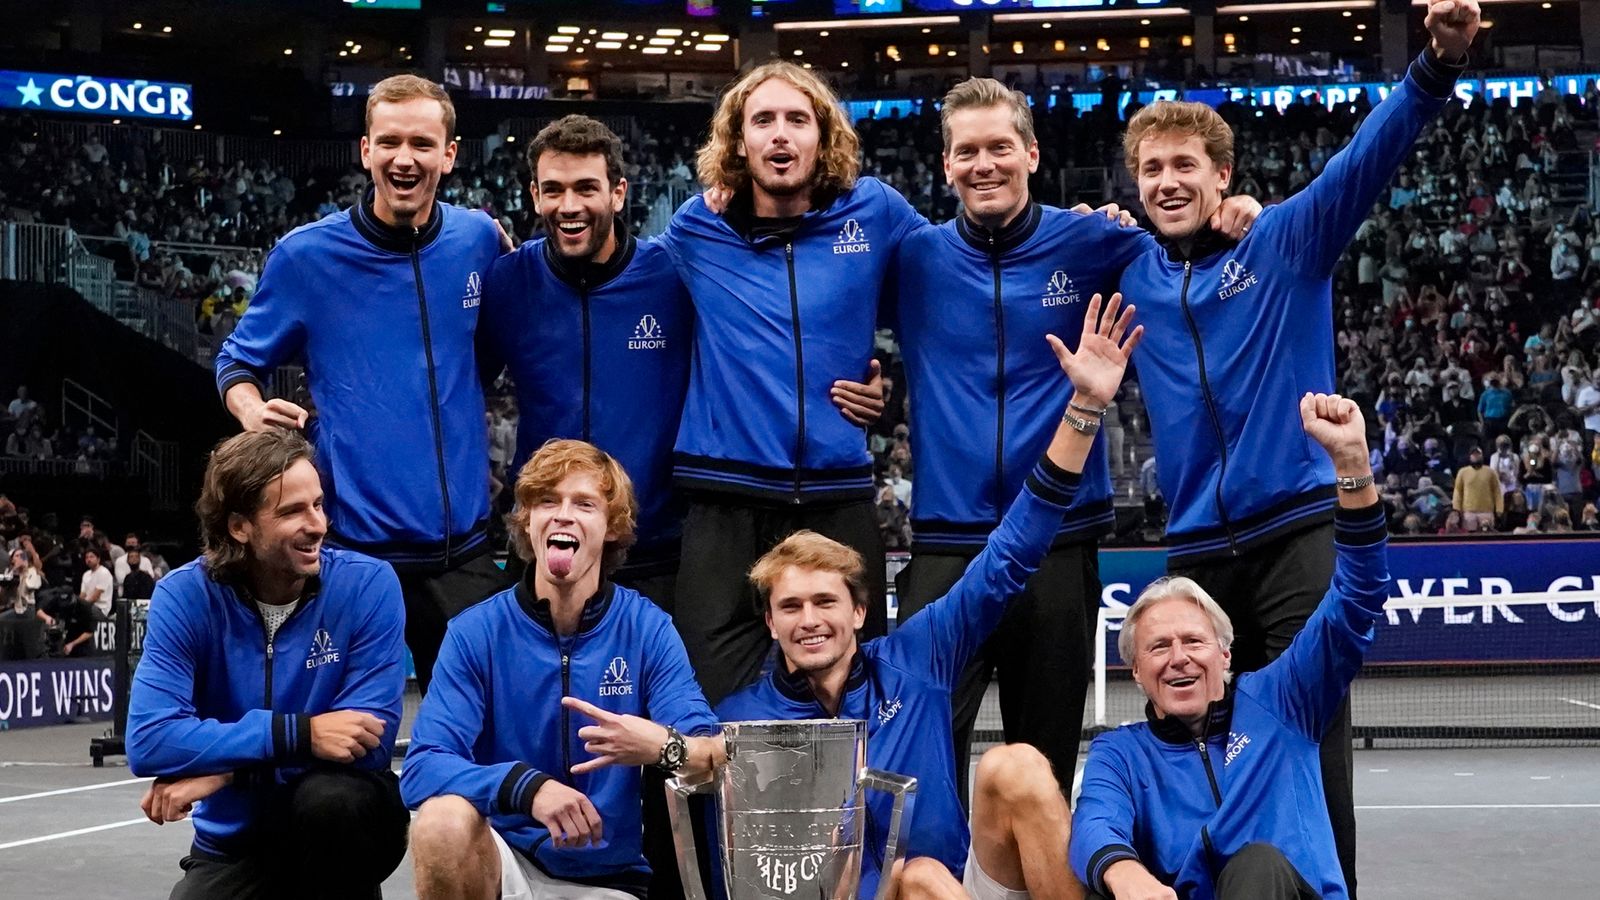 Team Europe win fourth consecutive Laver Cup with an insurmountable 14